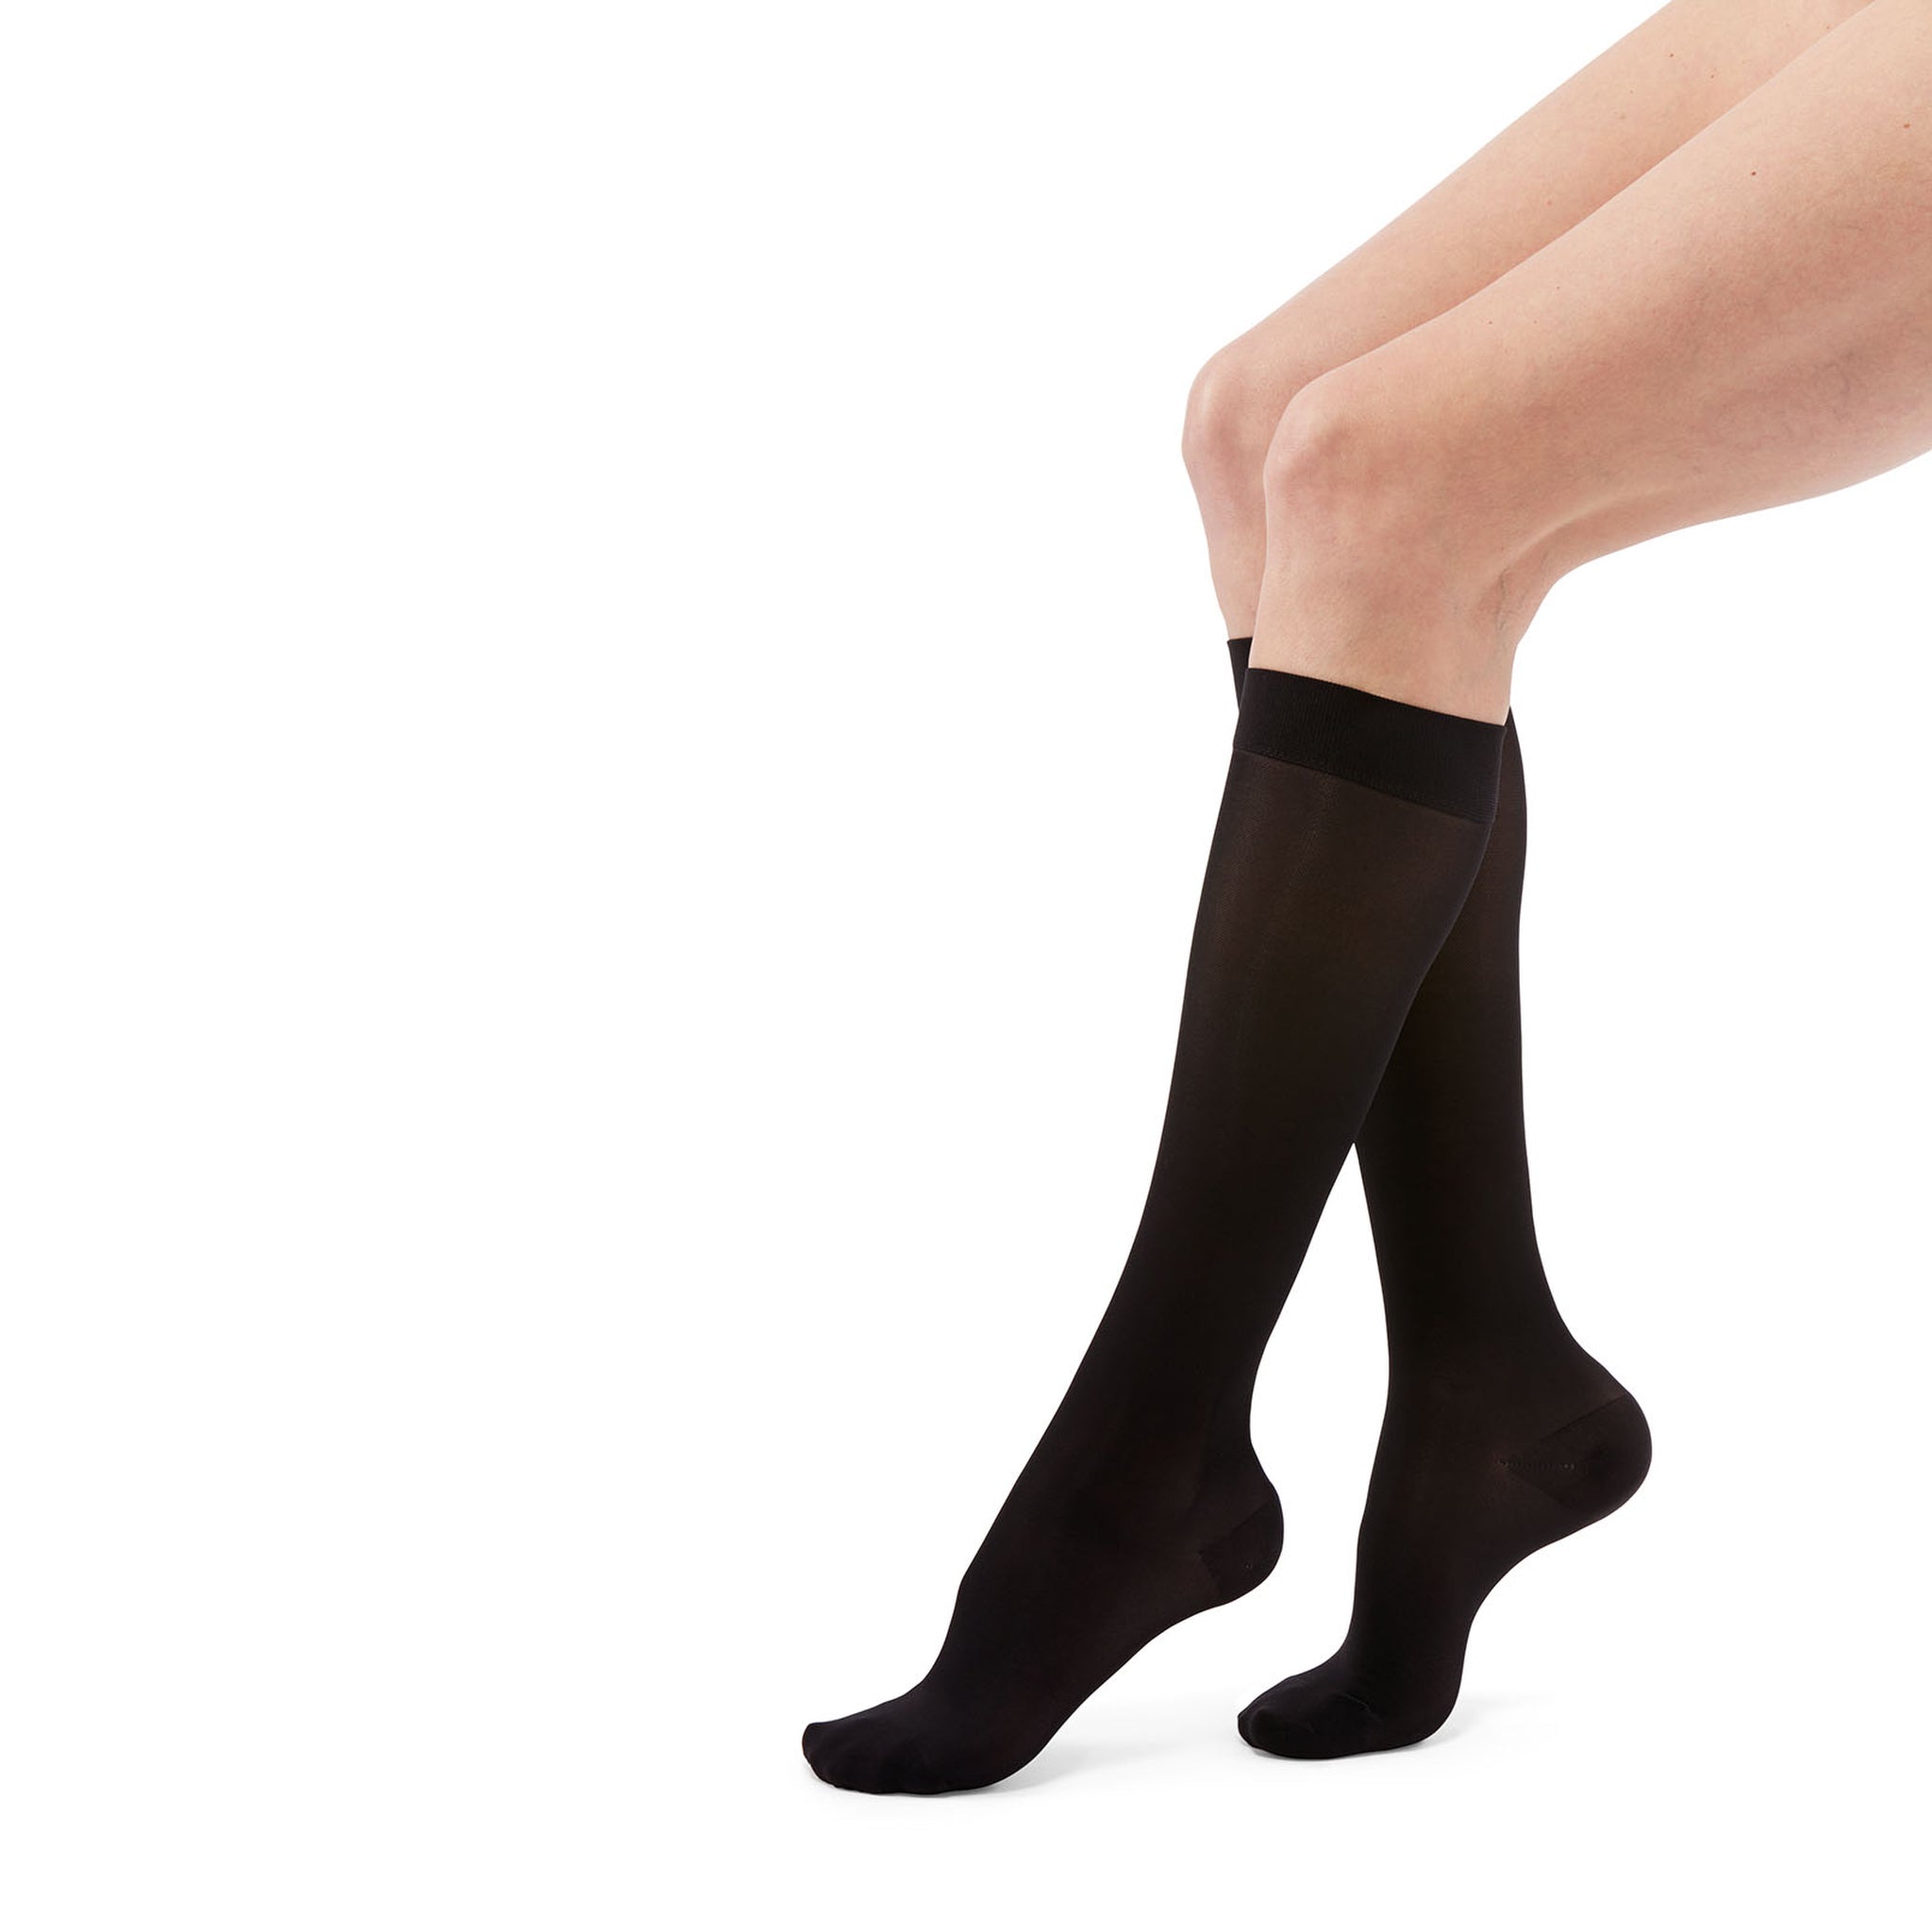 Graduated Therapy 20-30 mmHg Closed Toe Knee High Compression Standard  Stockings